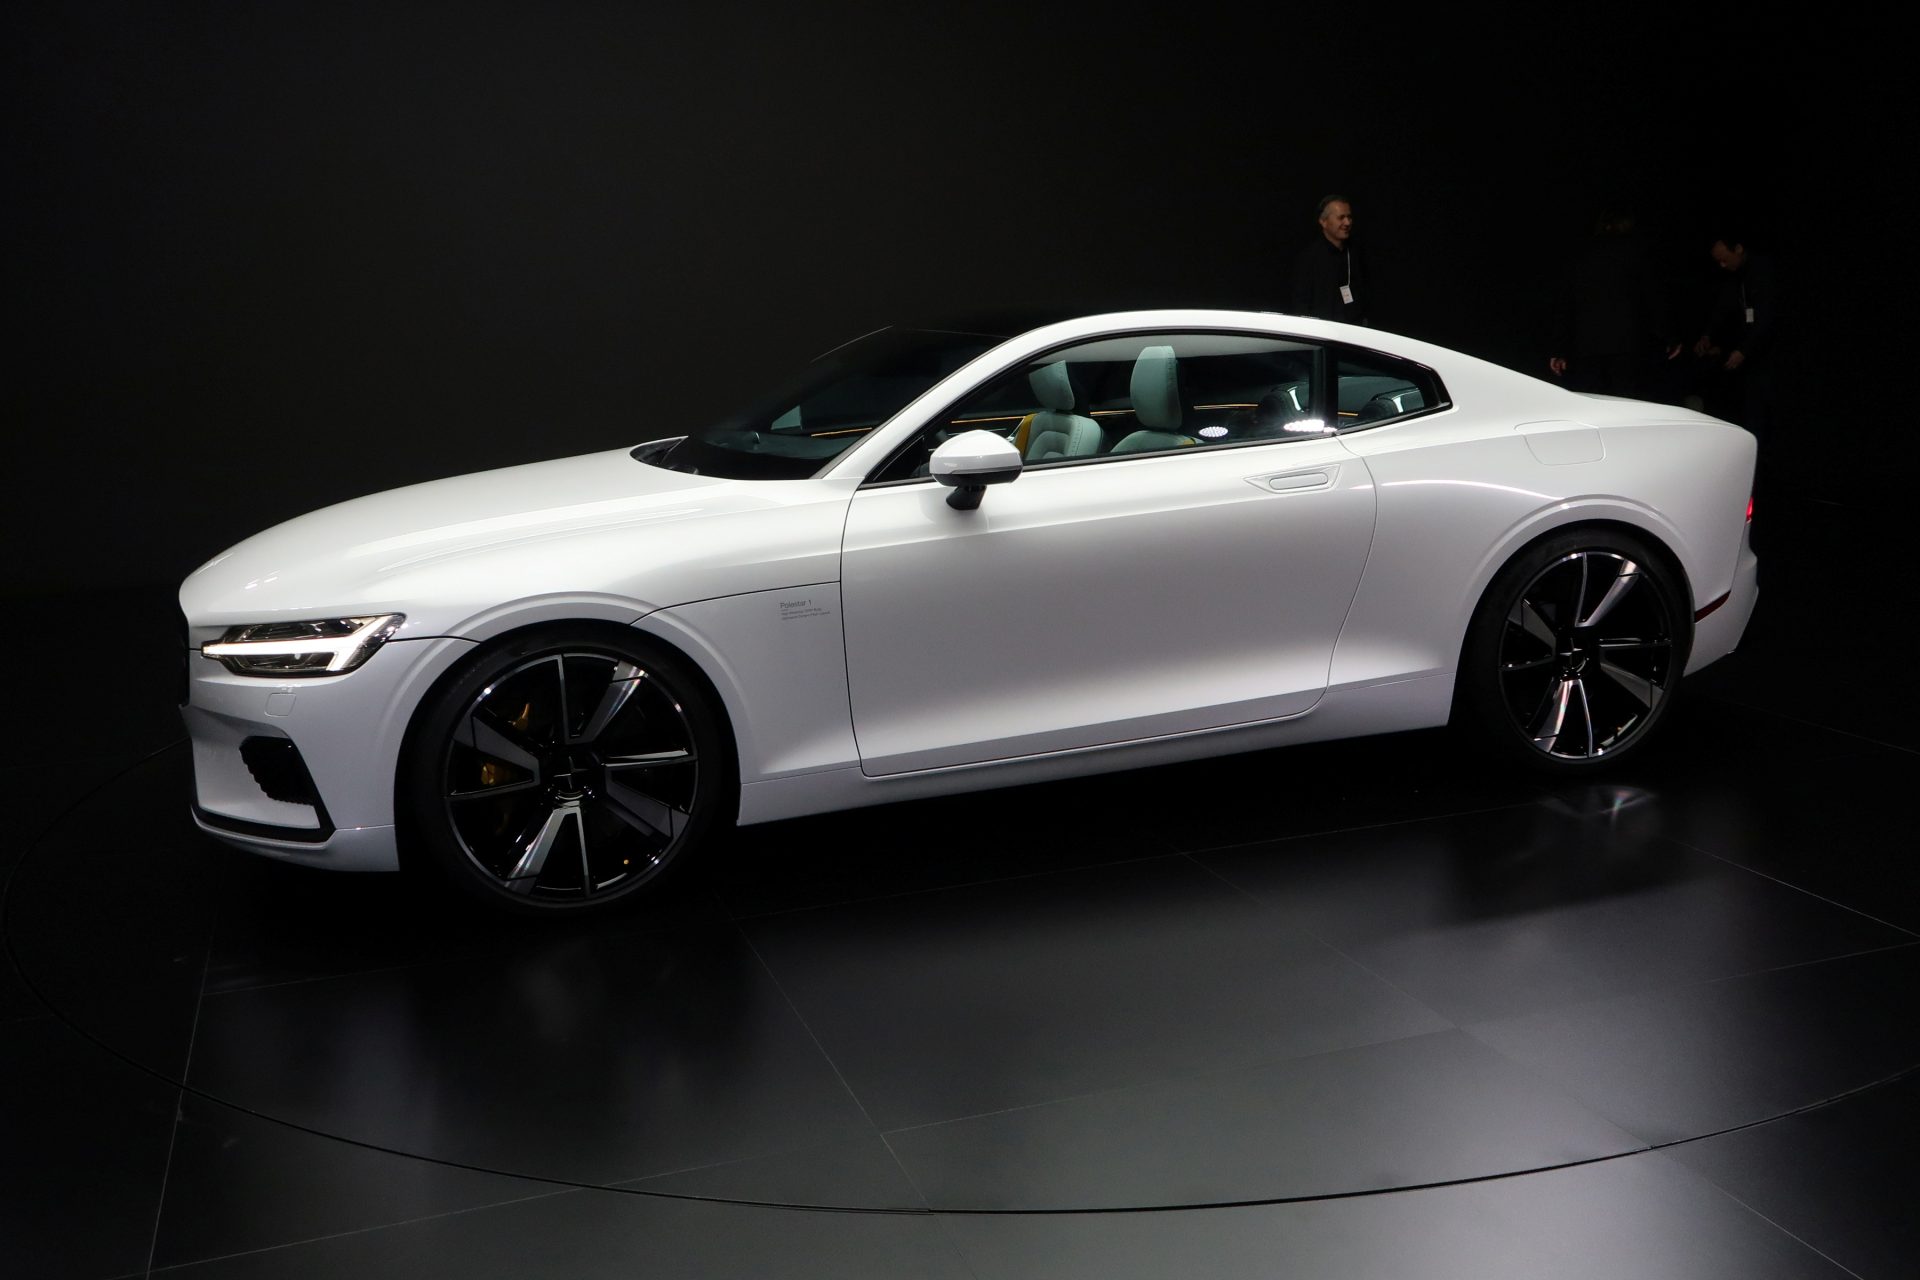 Polestar wants its vehicles to be carbon-neutral by 2030